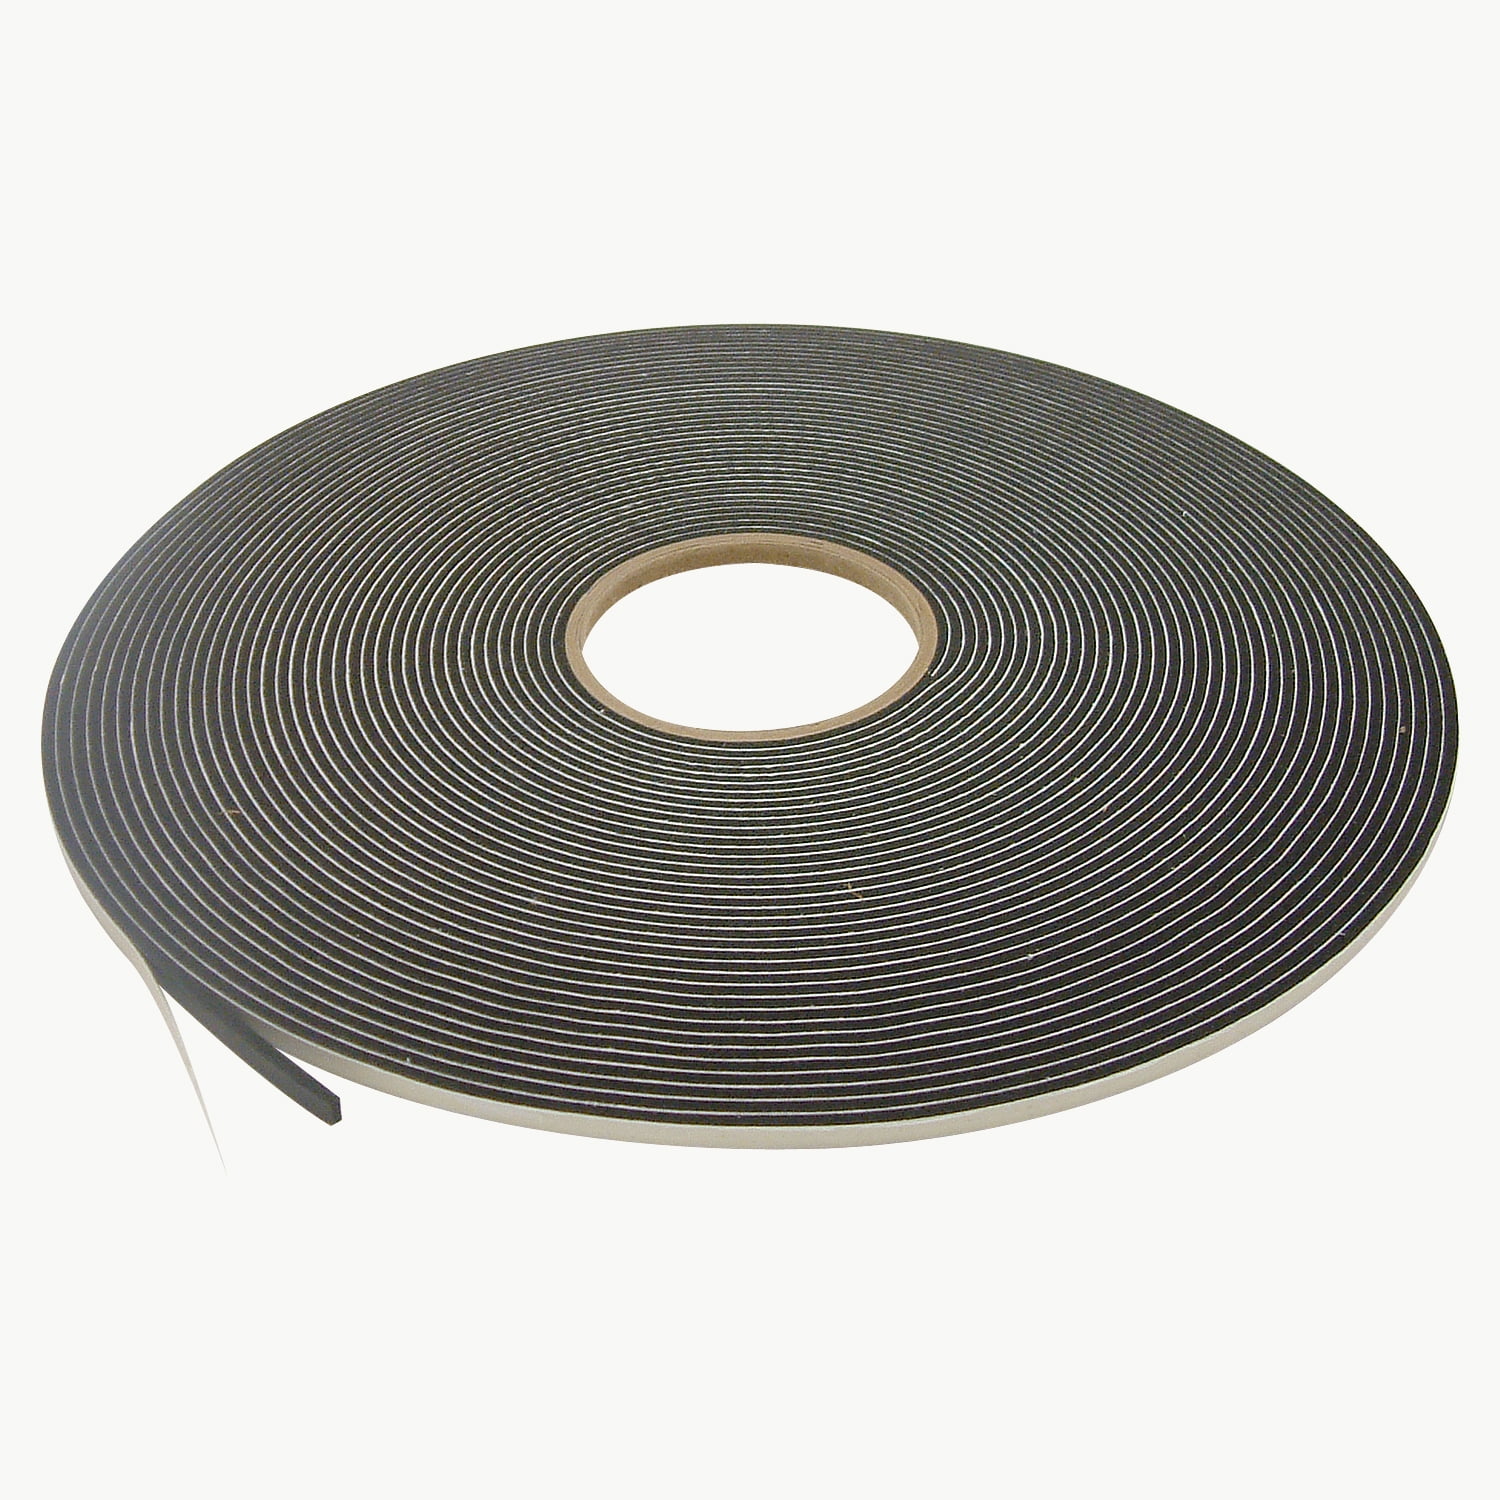 Adhesive Foam Tape Low Density Sound Closed Cell Foam, 